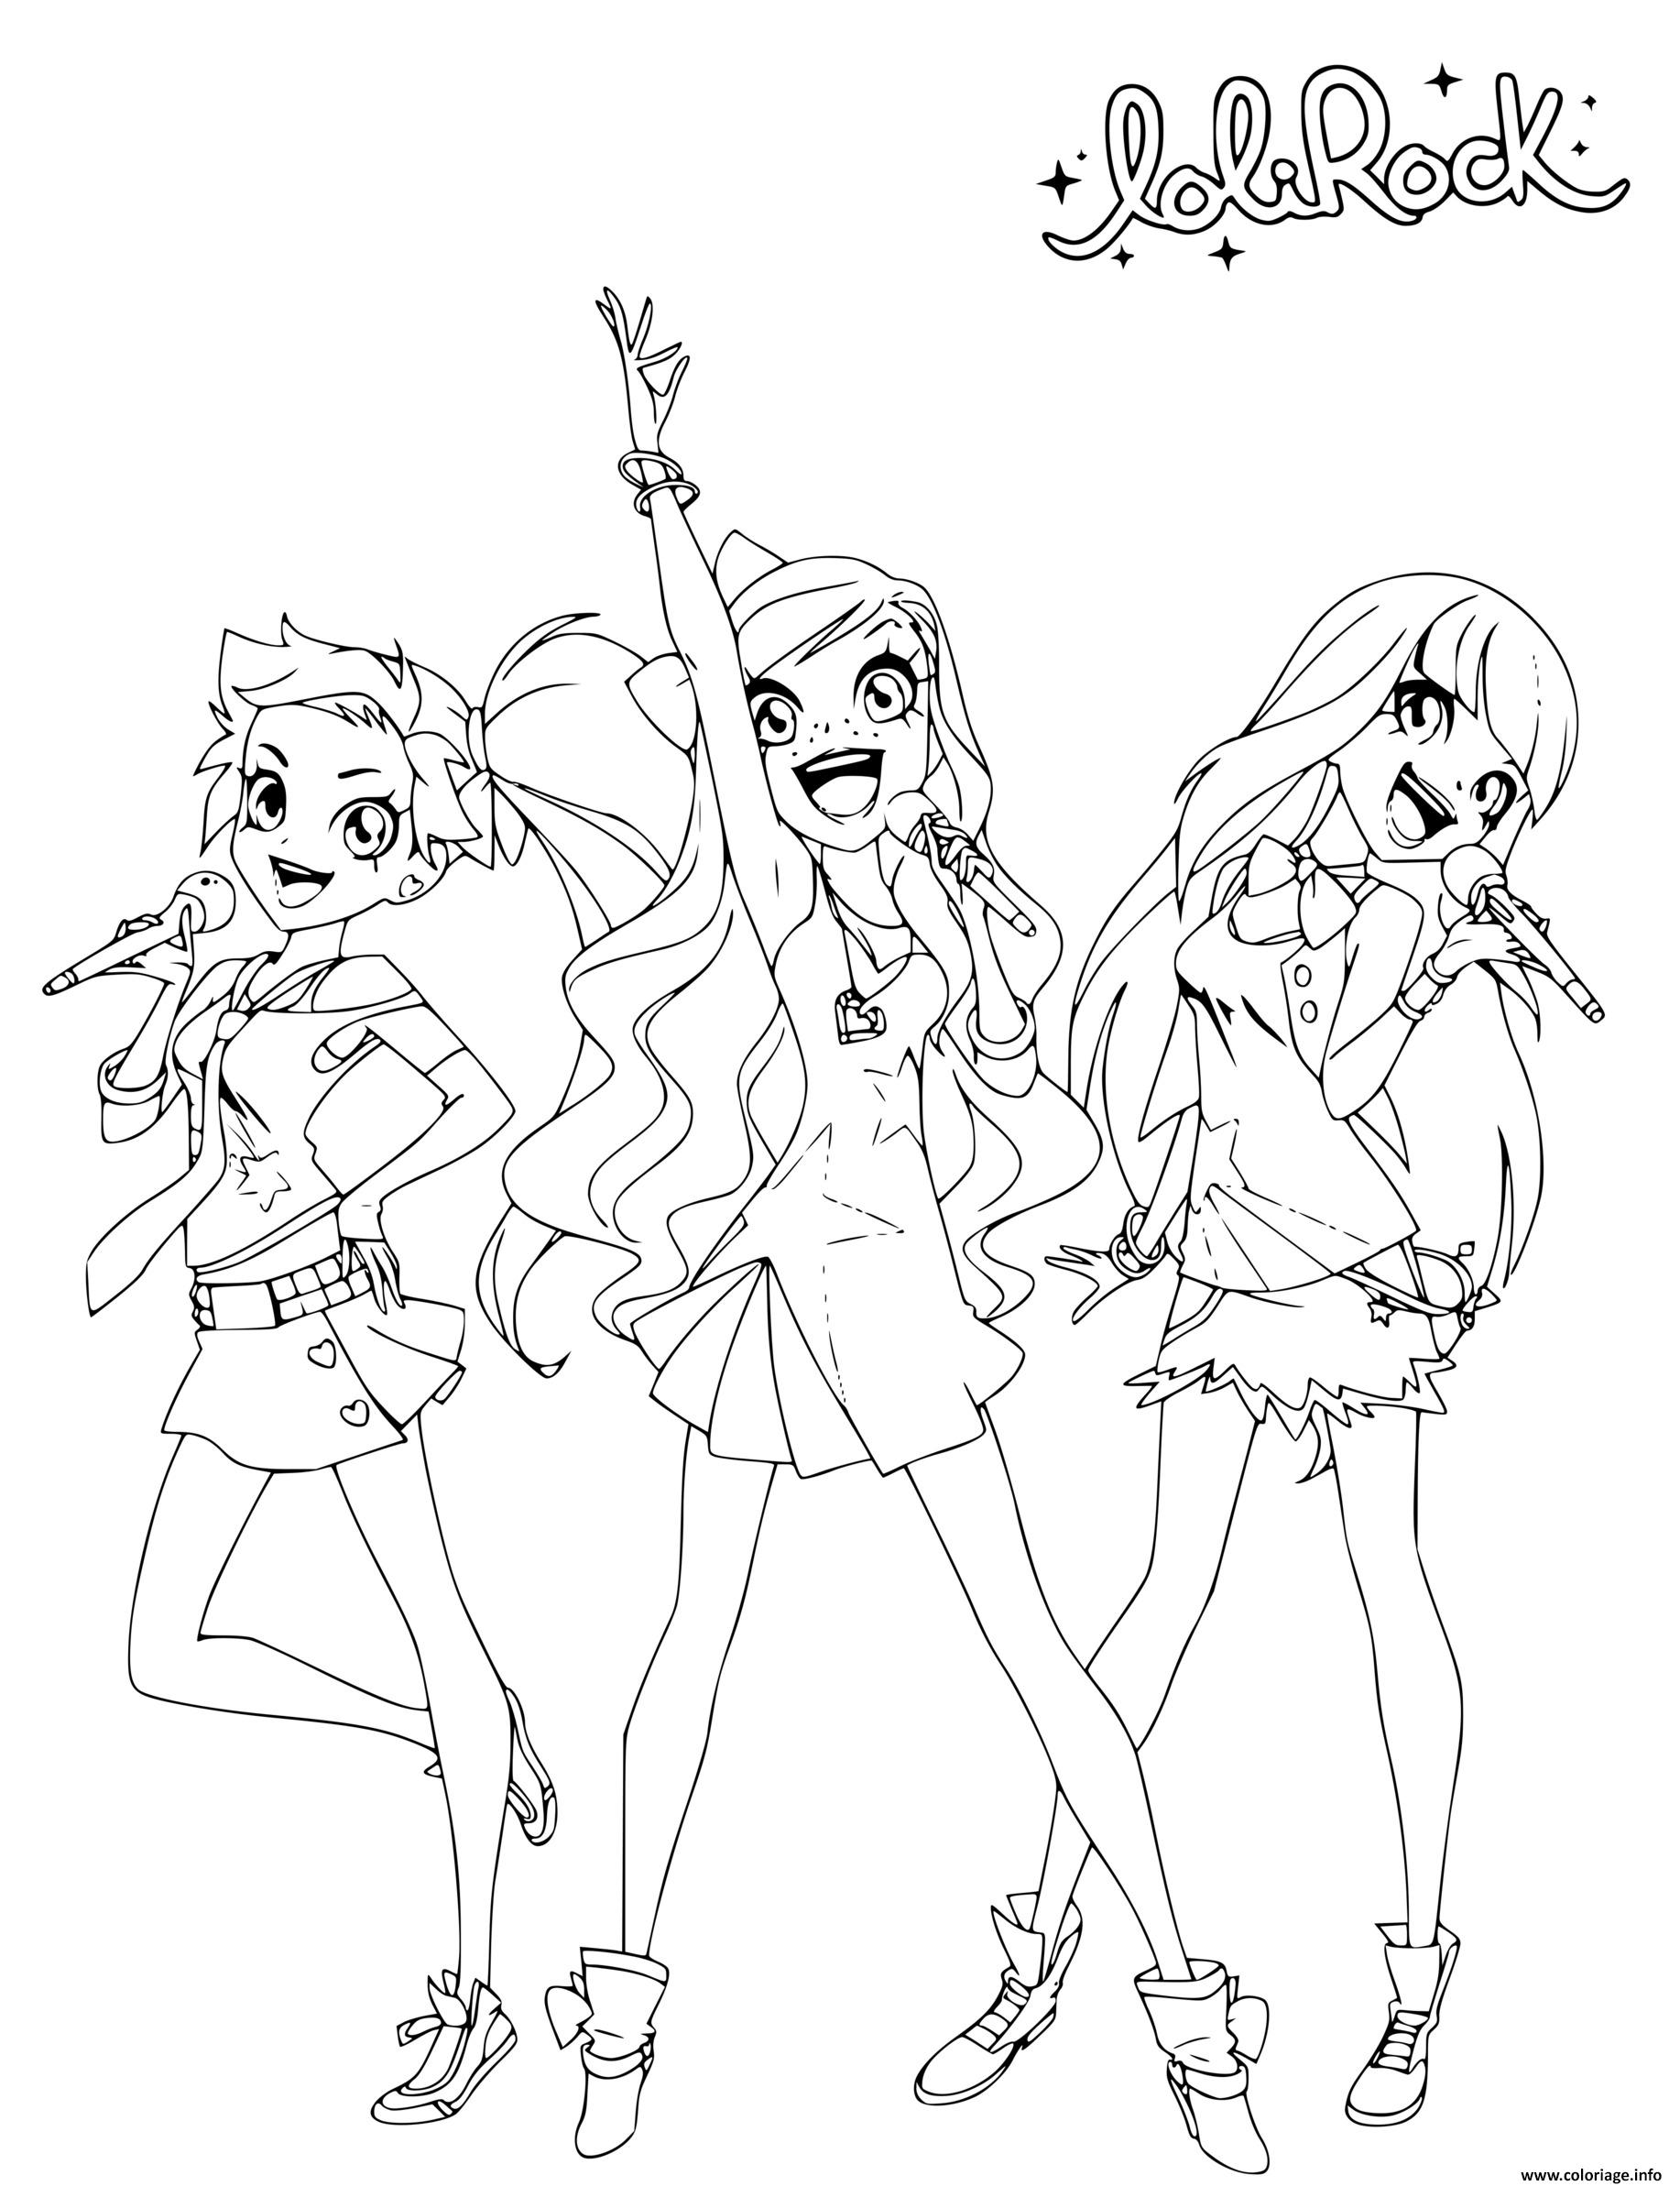 Coloriage Free Printable LoliRock Coloring Page - JeColorie.com